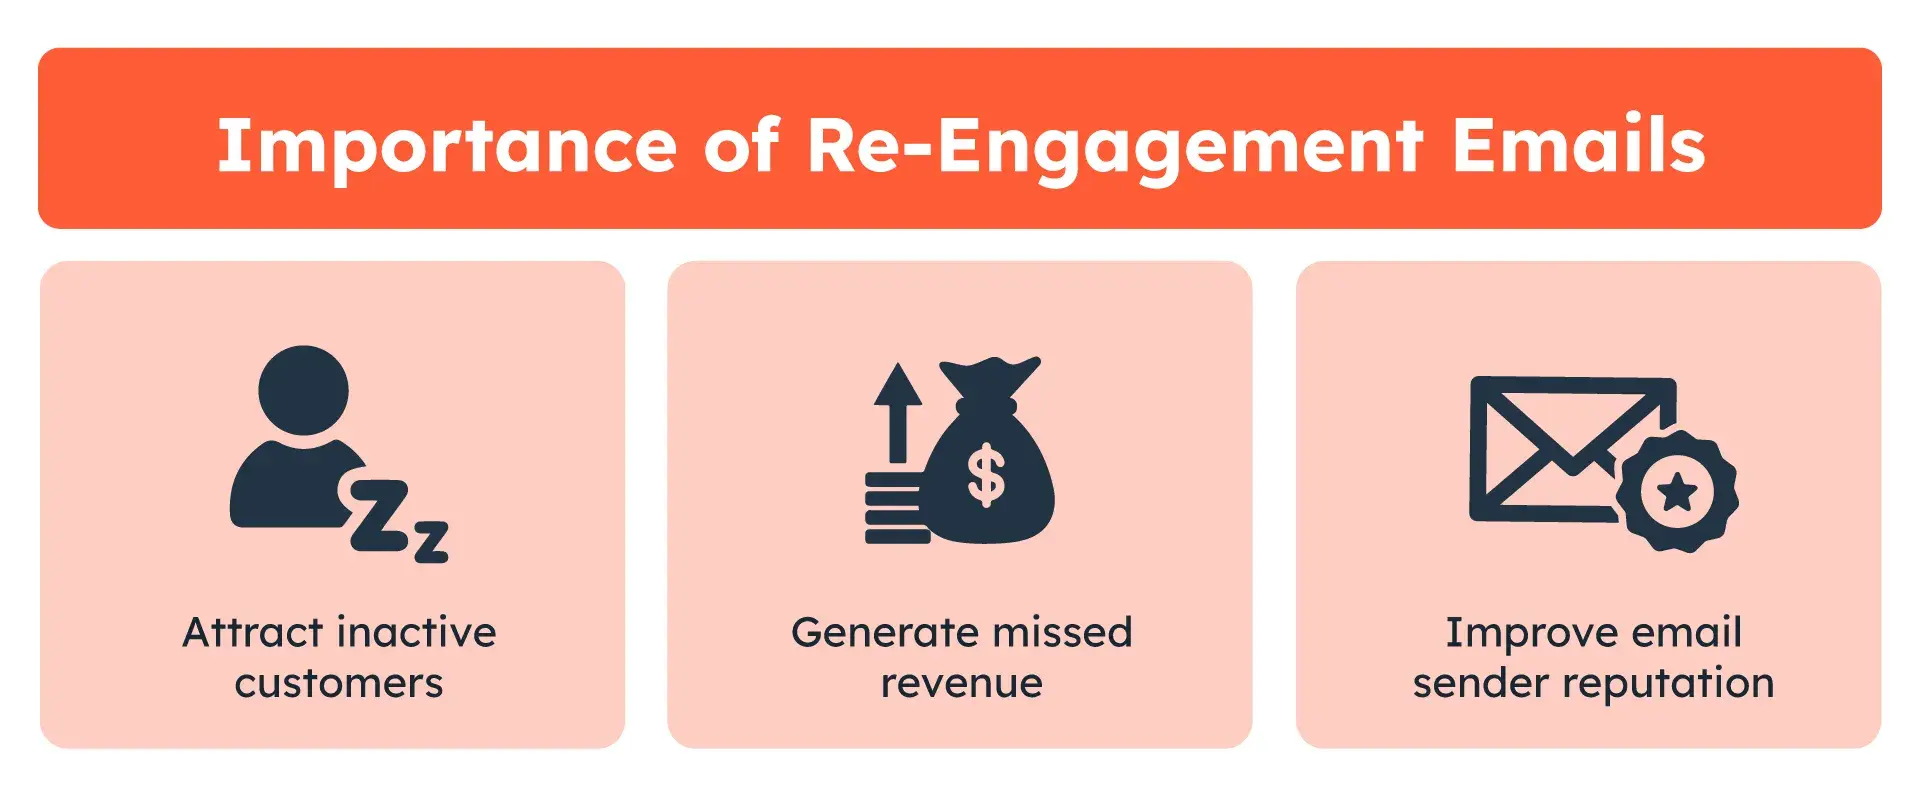 Importance of re-engagement emails. 